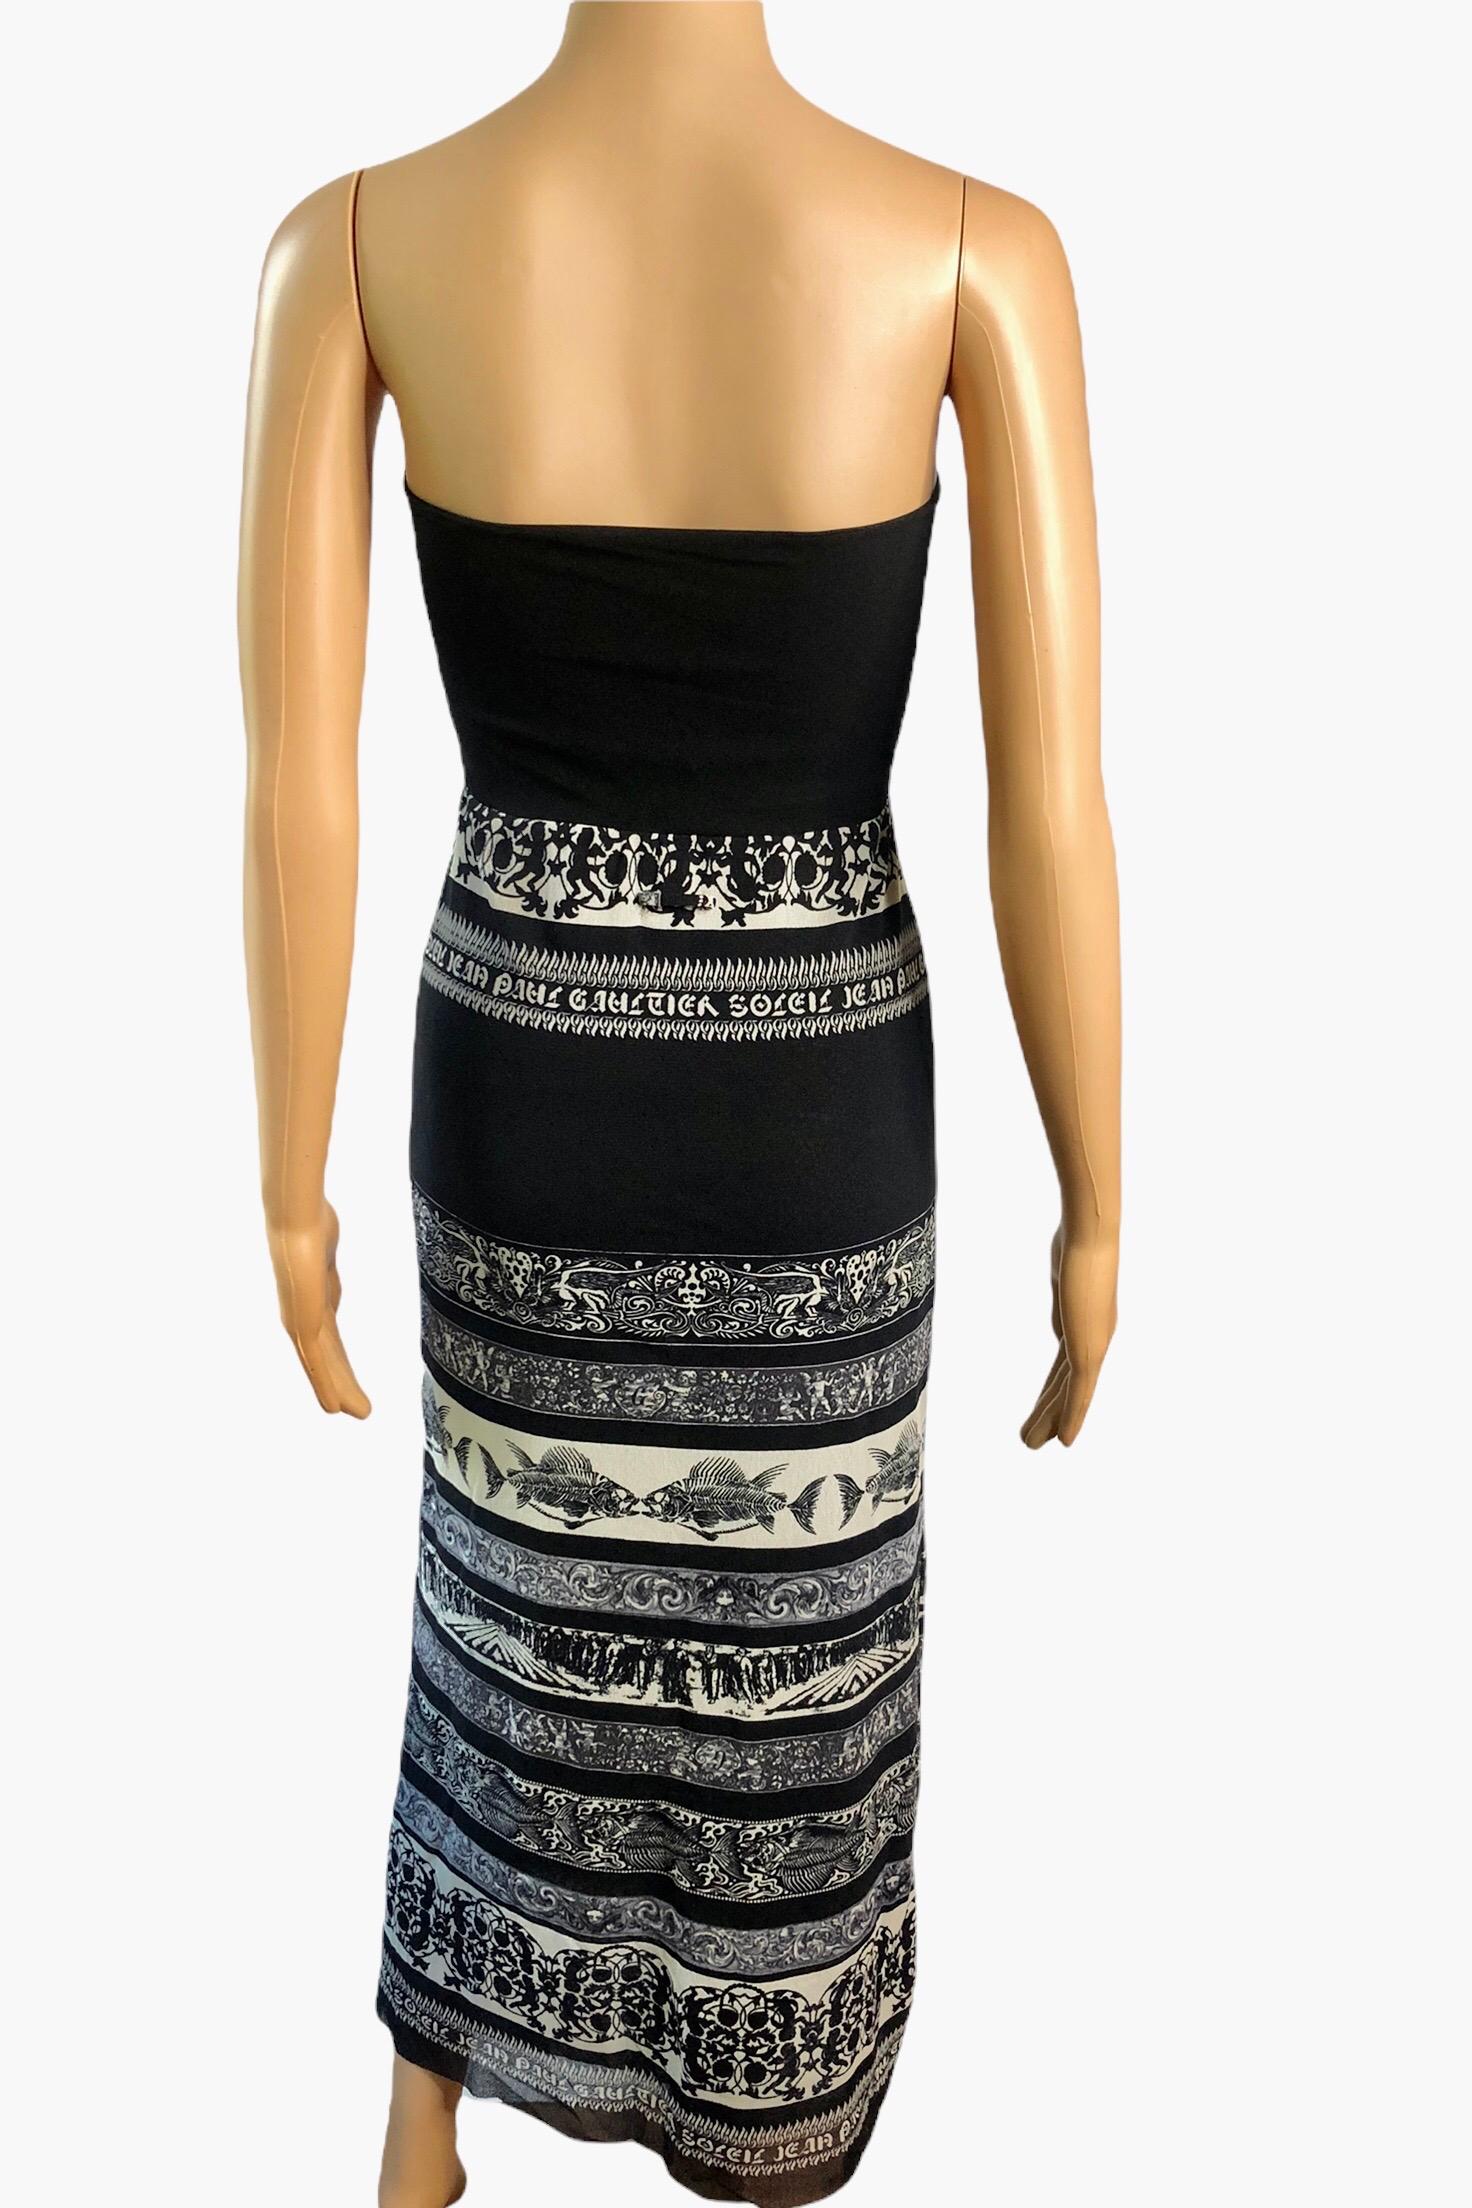 Jean Paul Gaultier Soleil Vintage Logo Semi-Sheer Bodycon Mesh Maxi Skirt Dress Size M

Please note this piece is very versatile and it could be worn as a strapless dress or a maxi skirt as shown in the photos.